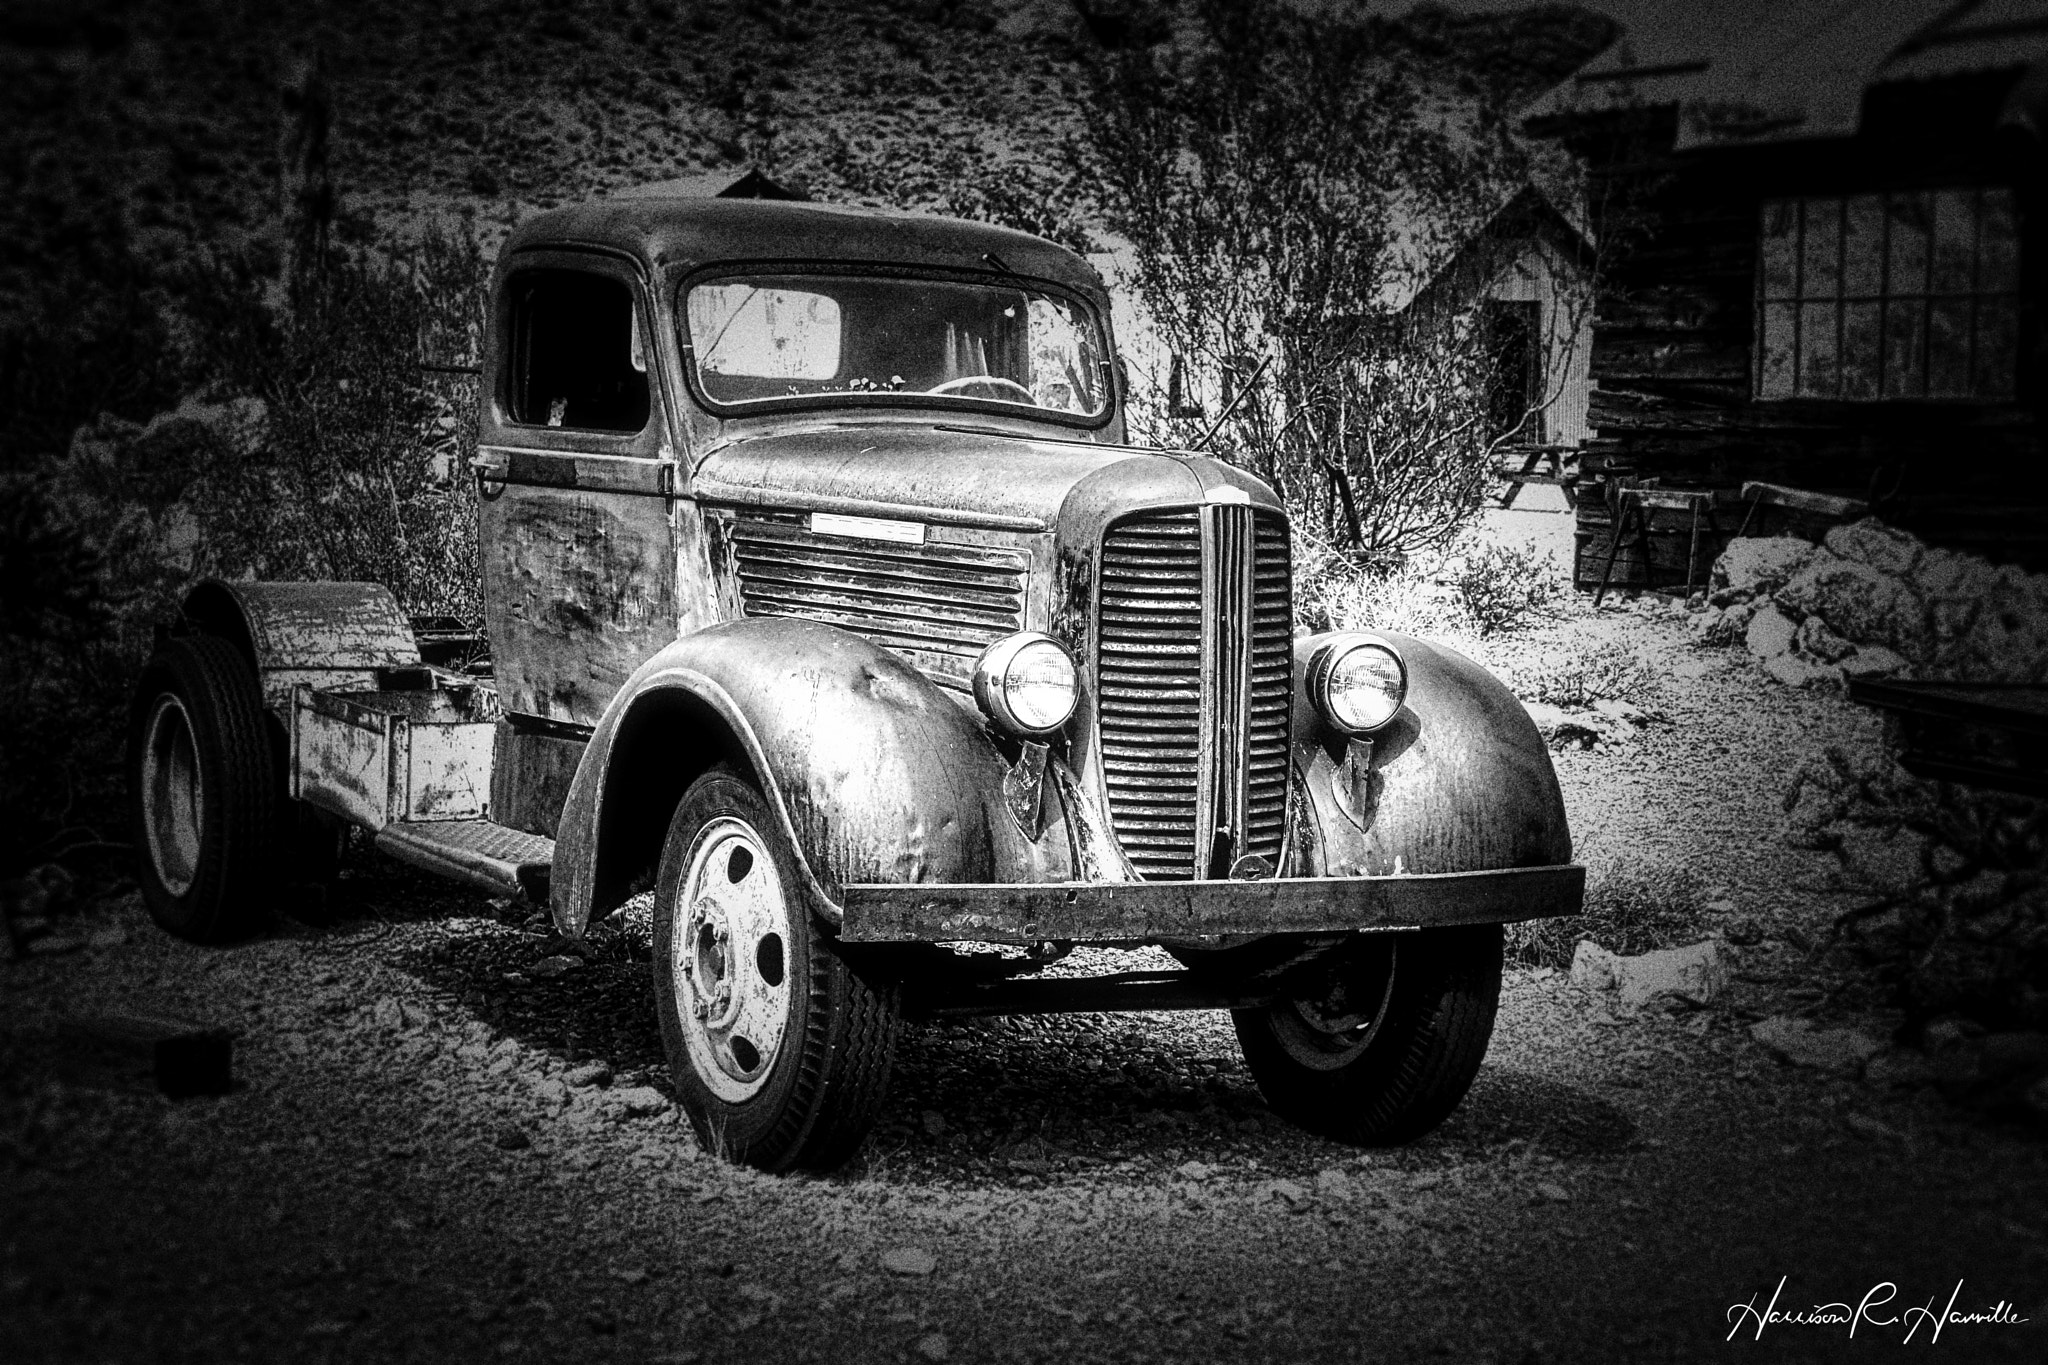 Hasselblad Lunar sample photo. Old dodge truck photography